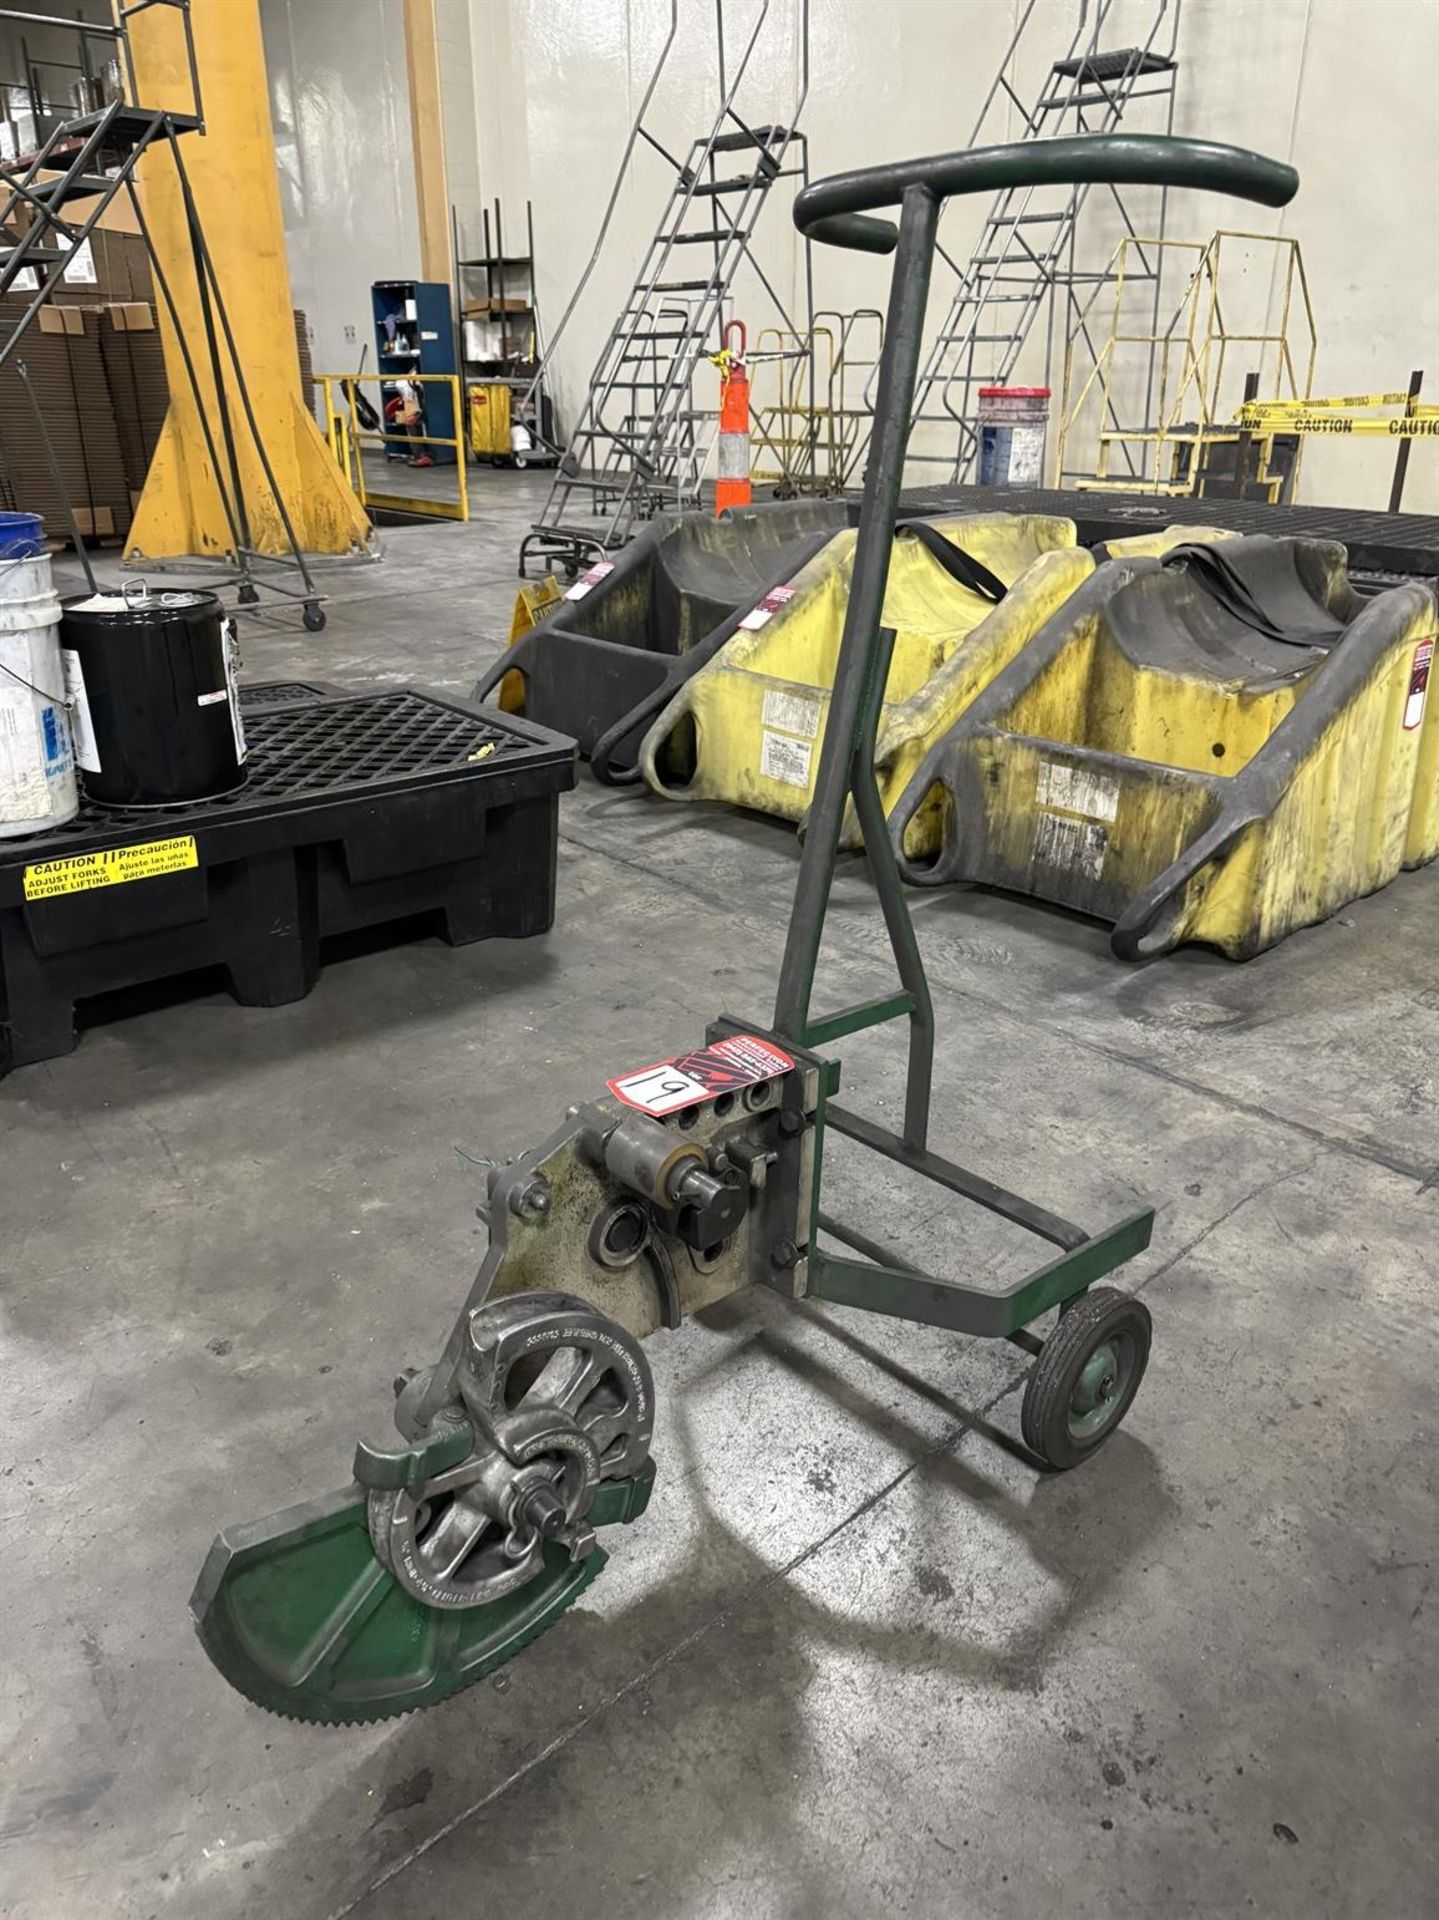 Lot Comprising GREENLEE 1818 Conduit Bender, IMPERIAL 470FH and GEAR WRENCH Tube Bender